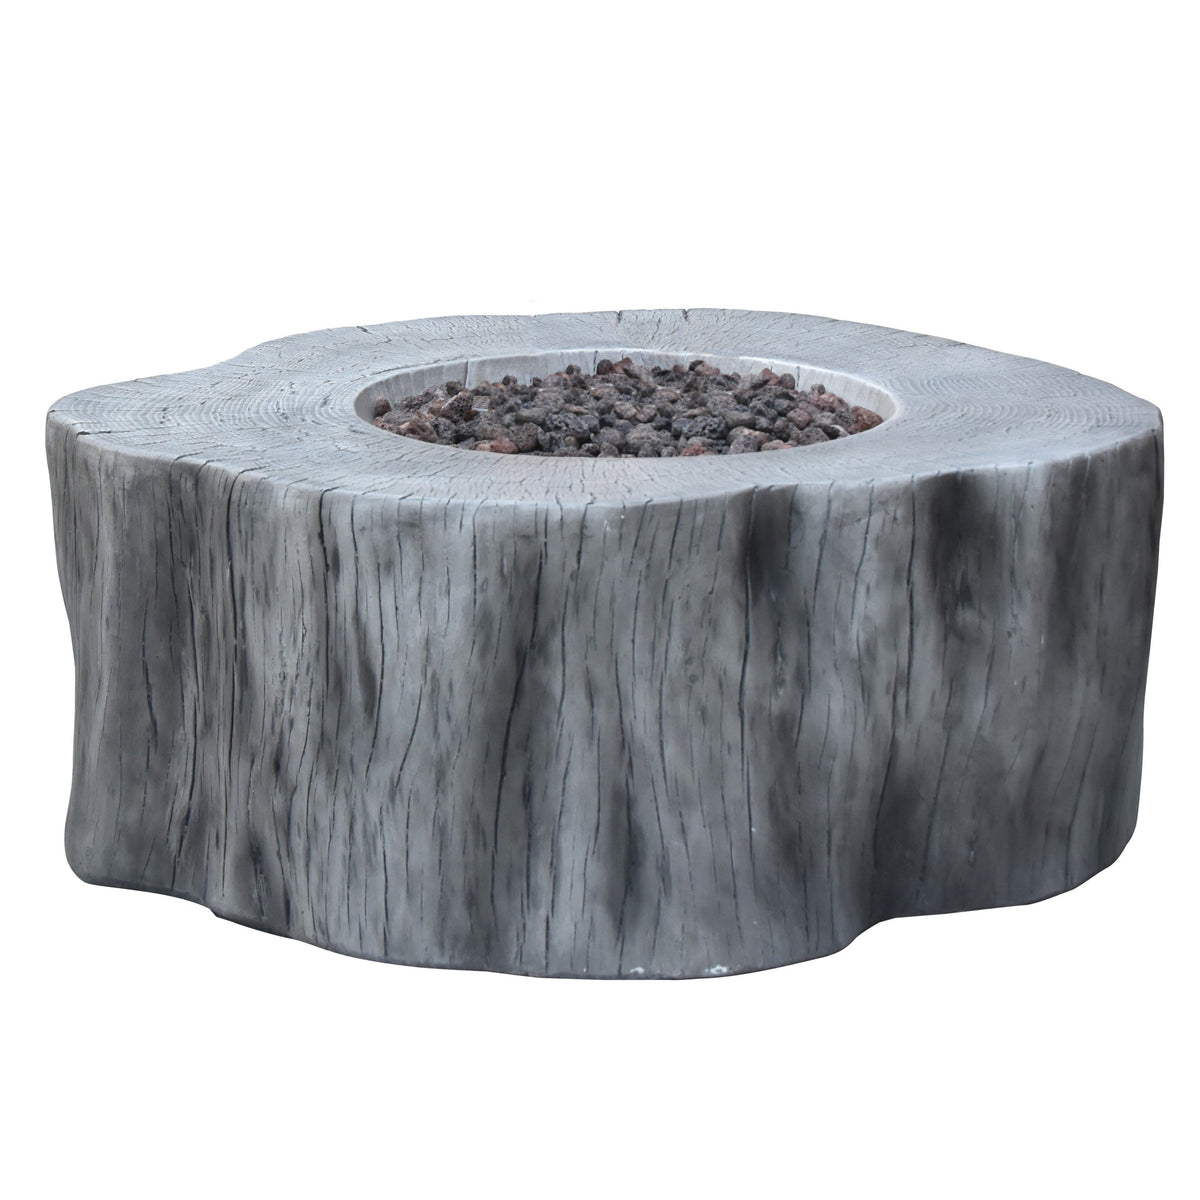 Elementi Manchester Fire Pit Table in Classic Gray